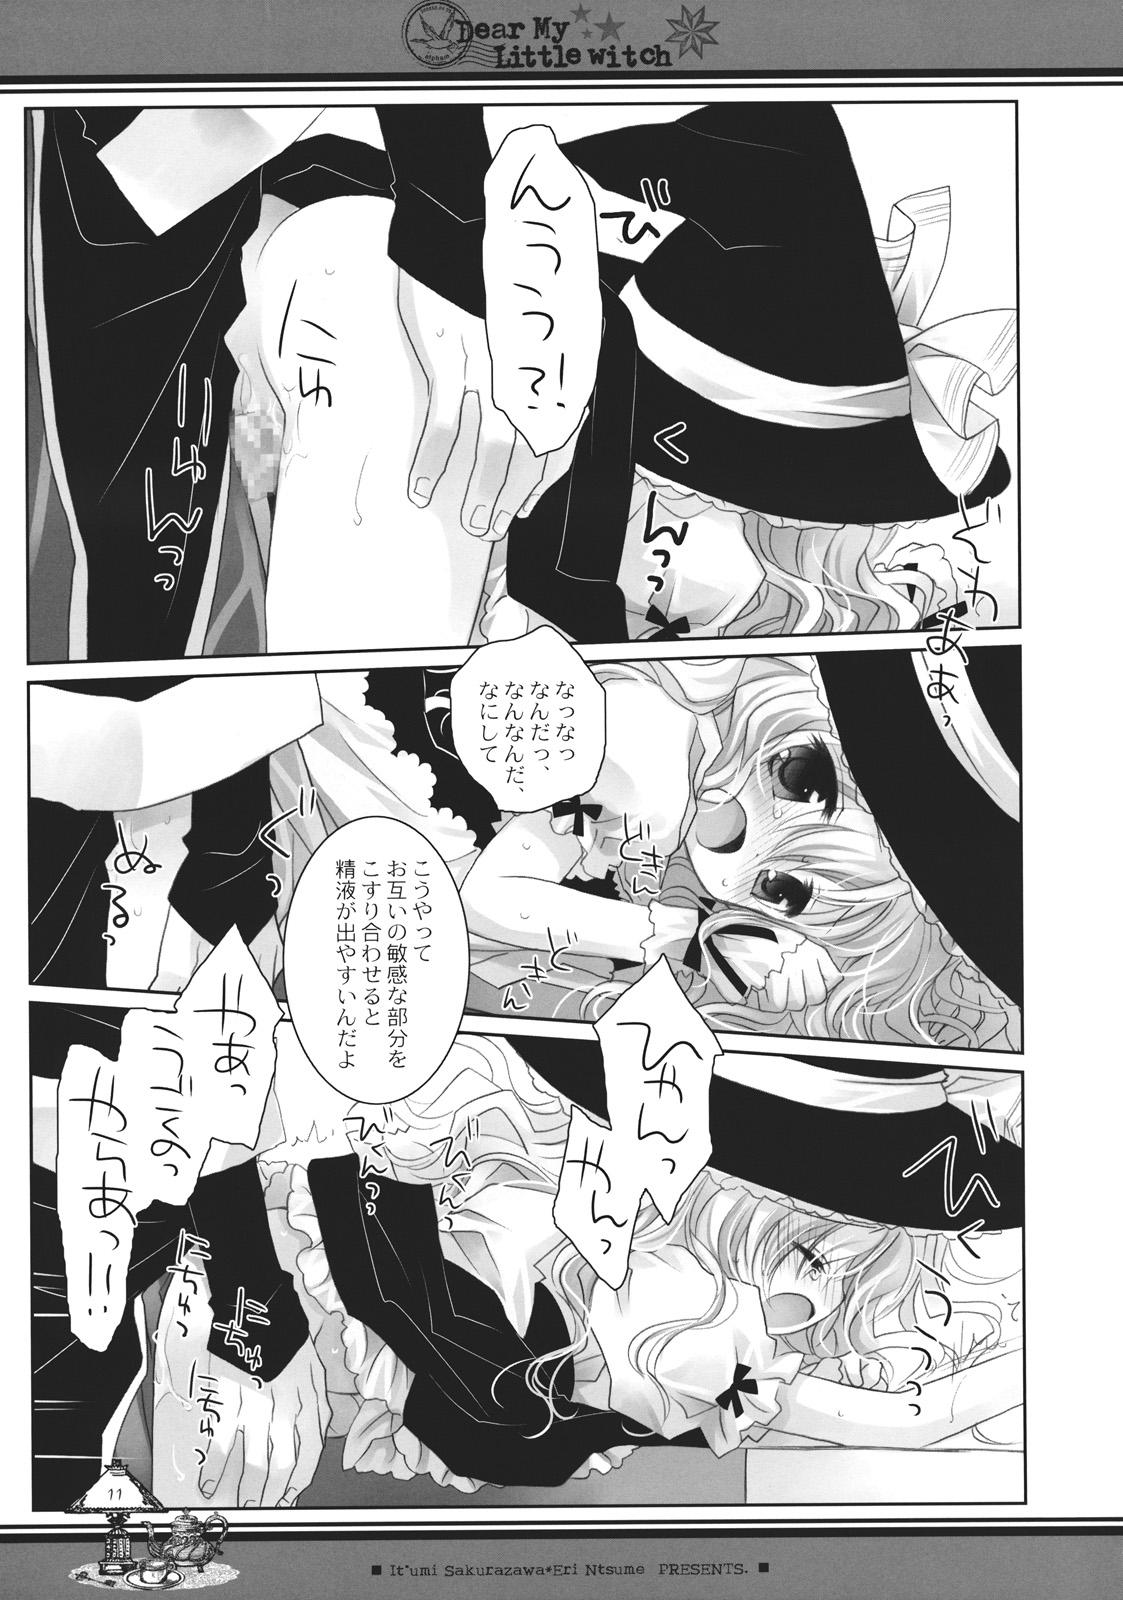 Titten Dear My Little Witch - Touhou project Porn Blow Jobs - Page 11